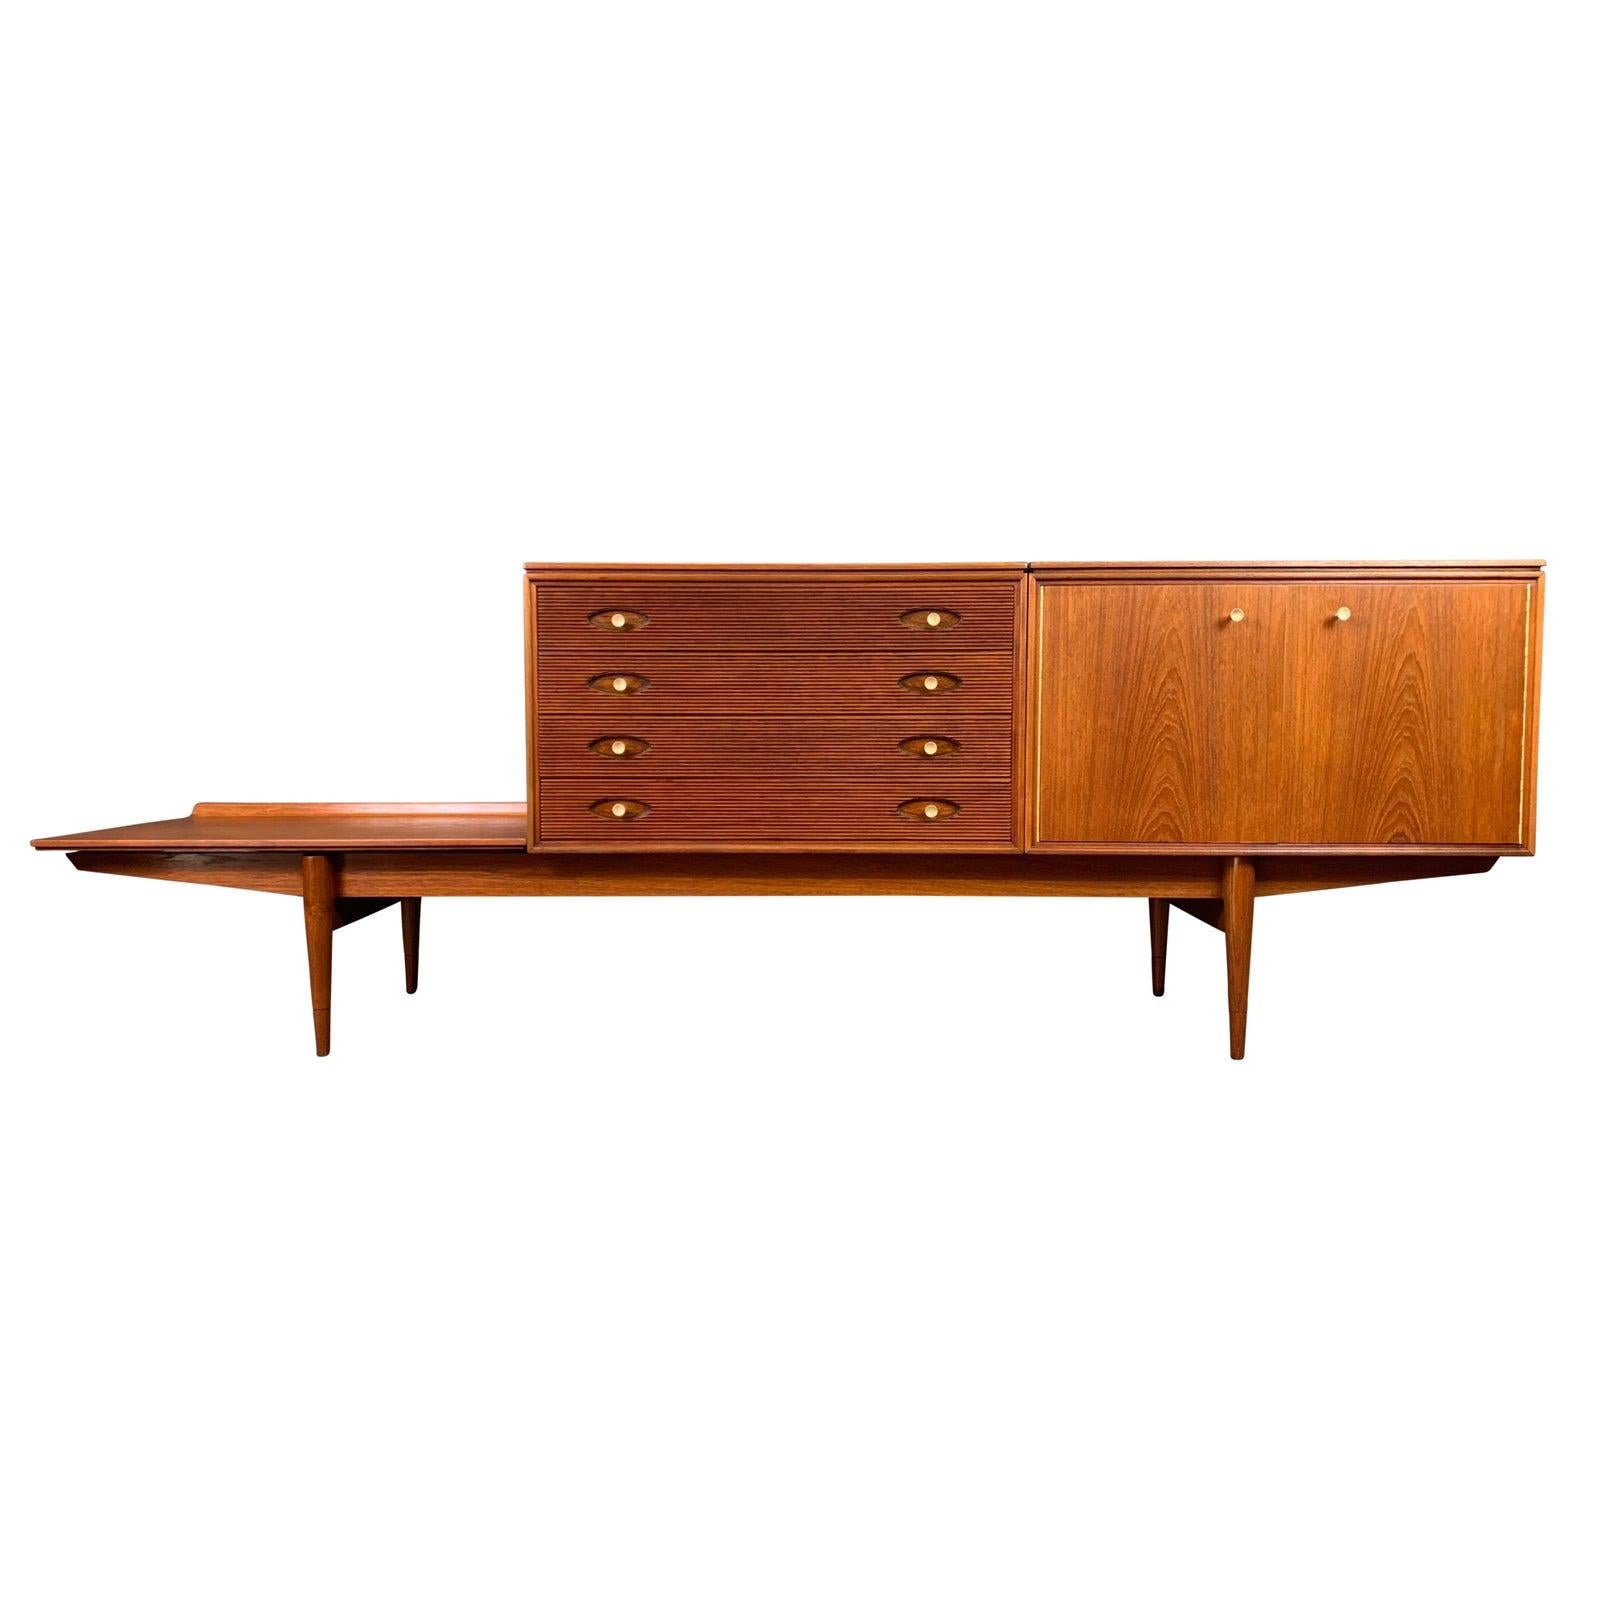 Here is a very rare british MCM modular sideboard designed by Richard Heritage and manufactured by Archie Shine in UK in the 1960s.
This very special piece, recently imported from England to California before its restoration, is composed of three